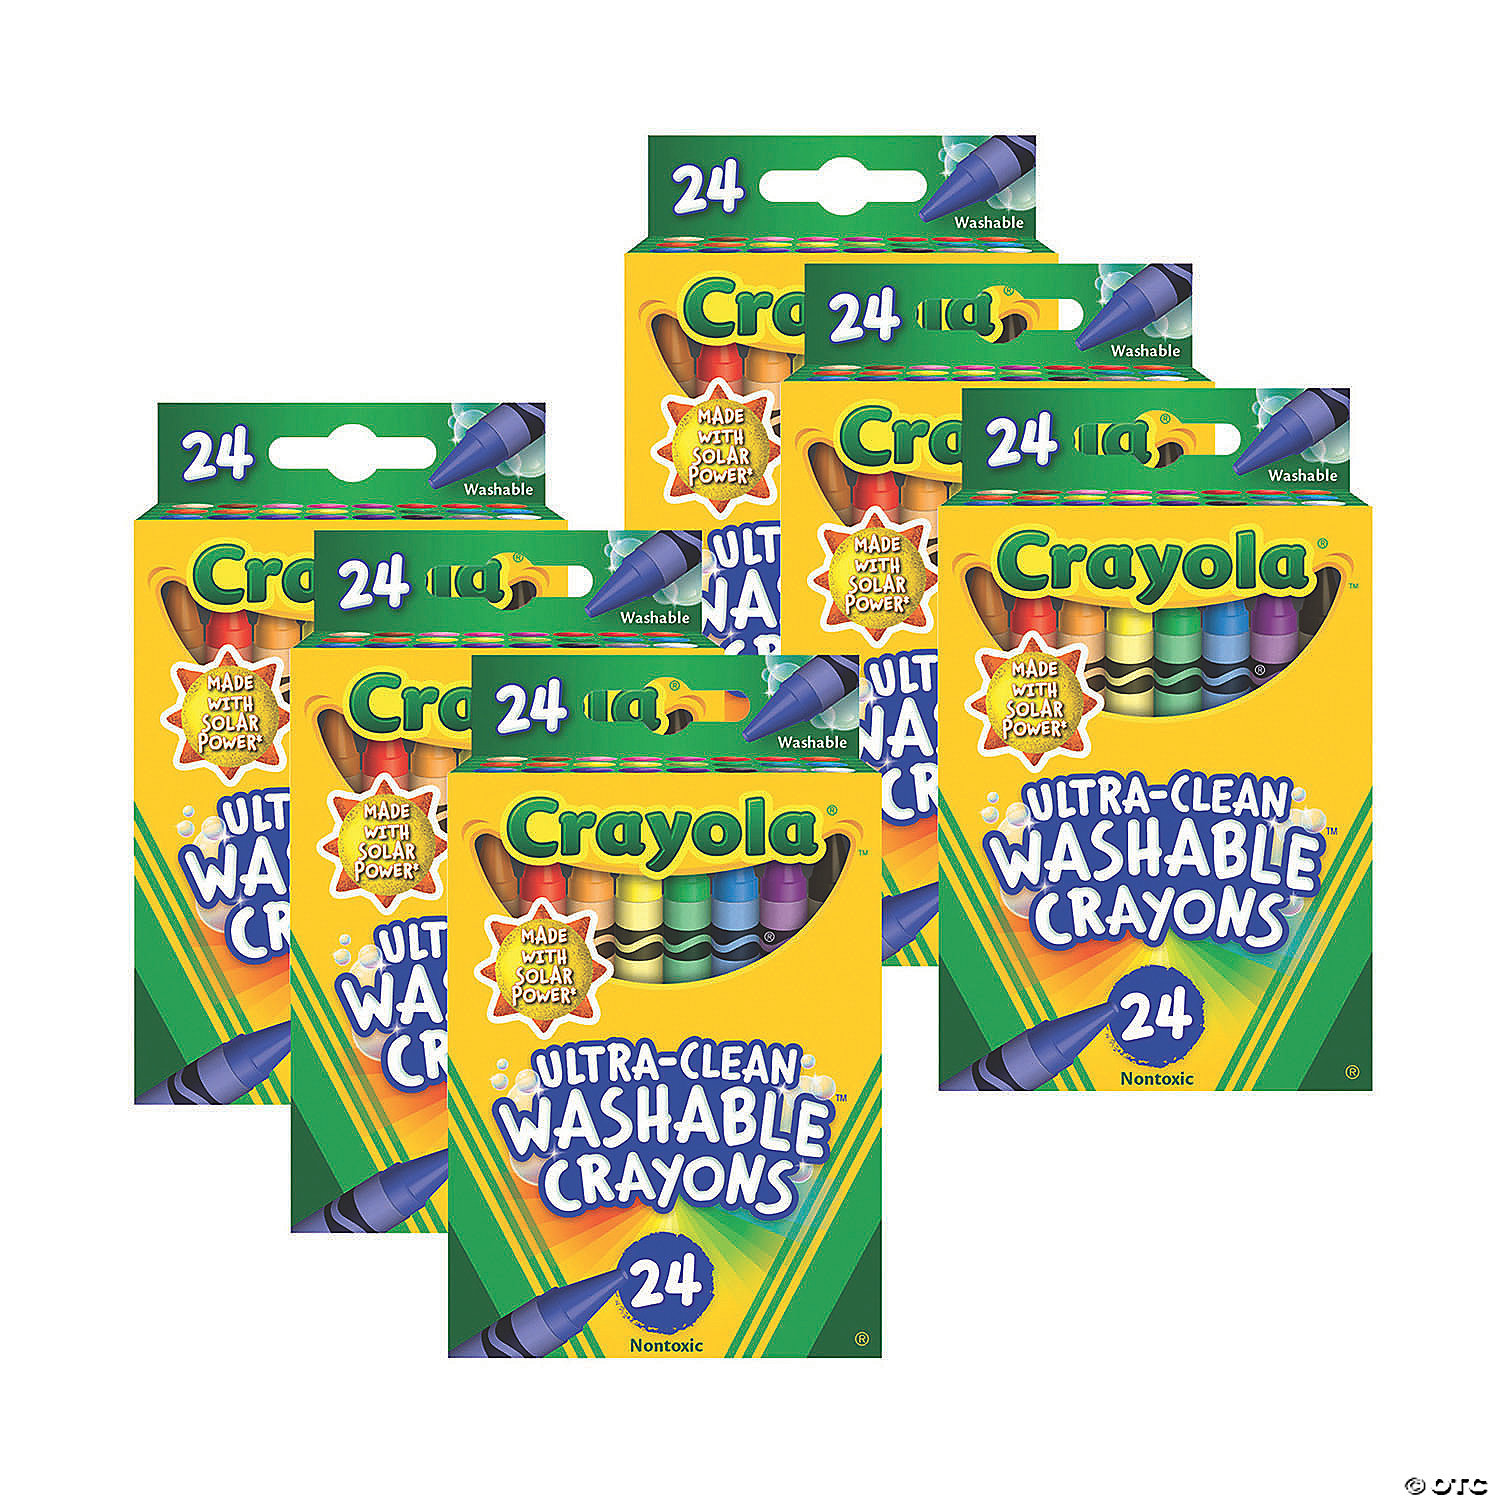 Crayola Ultra-Clean Washable Crayons - Regular Size, 24 Per Pack